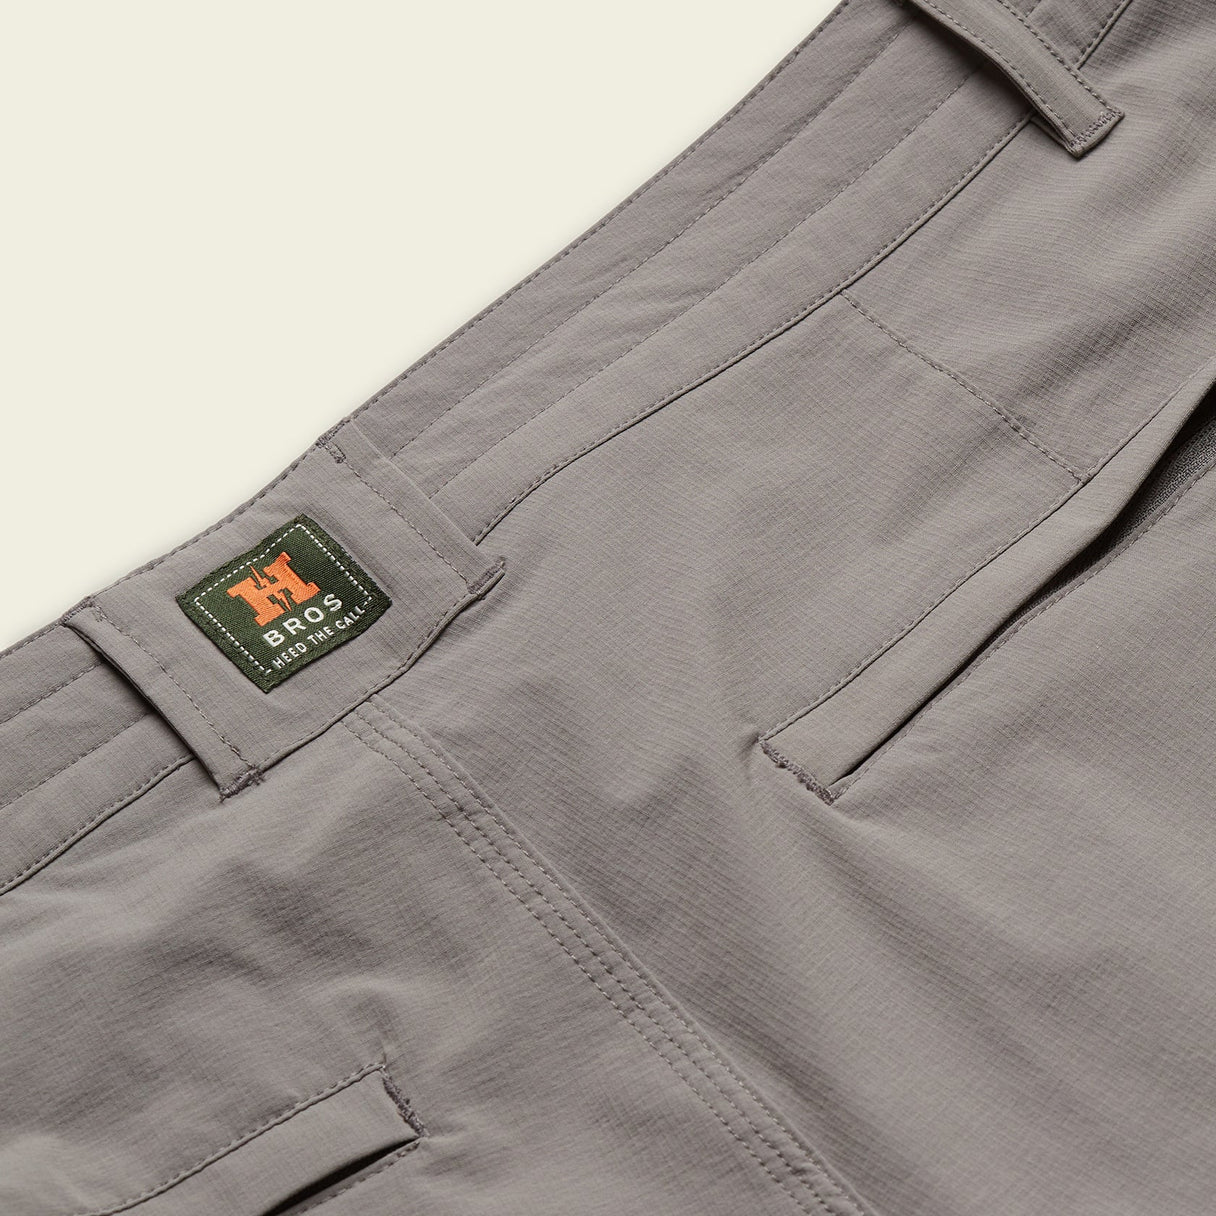 Howler Brothers Shoalwater Tech Pants